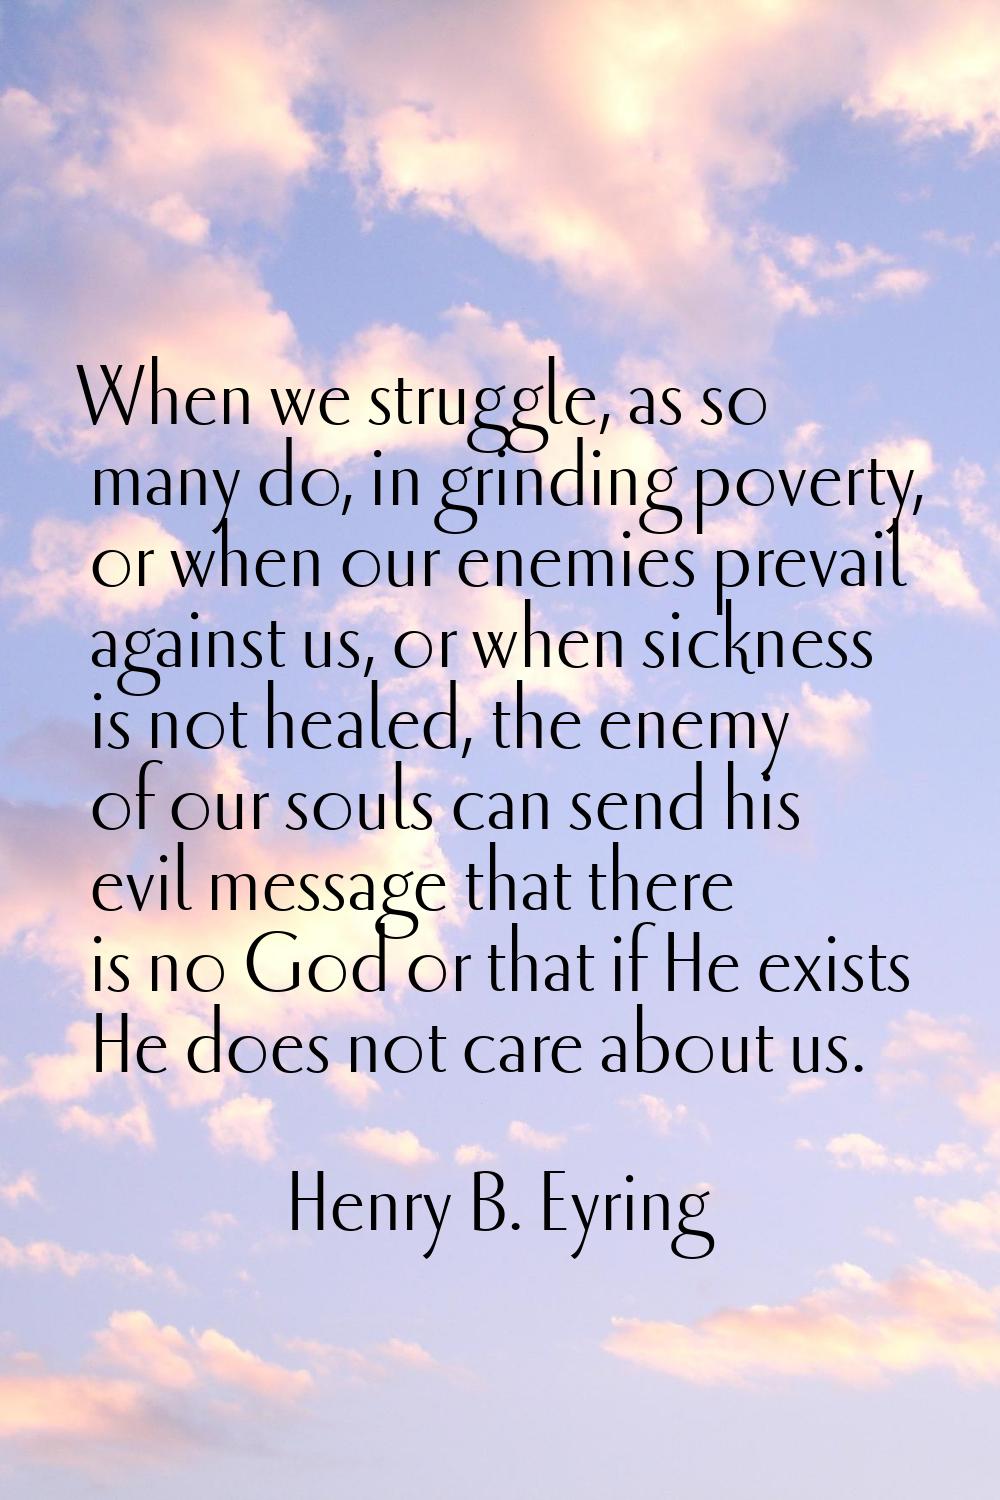 When we struggle, as so many do, in grinding poverty, or when our enemies prevail against us, or wh